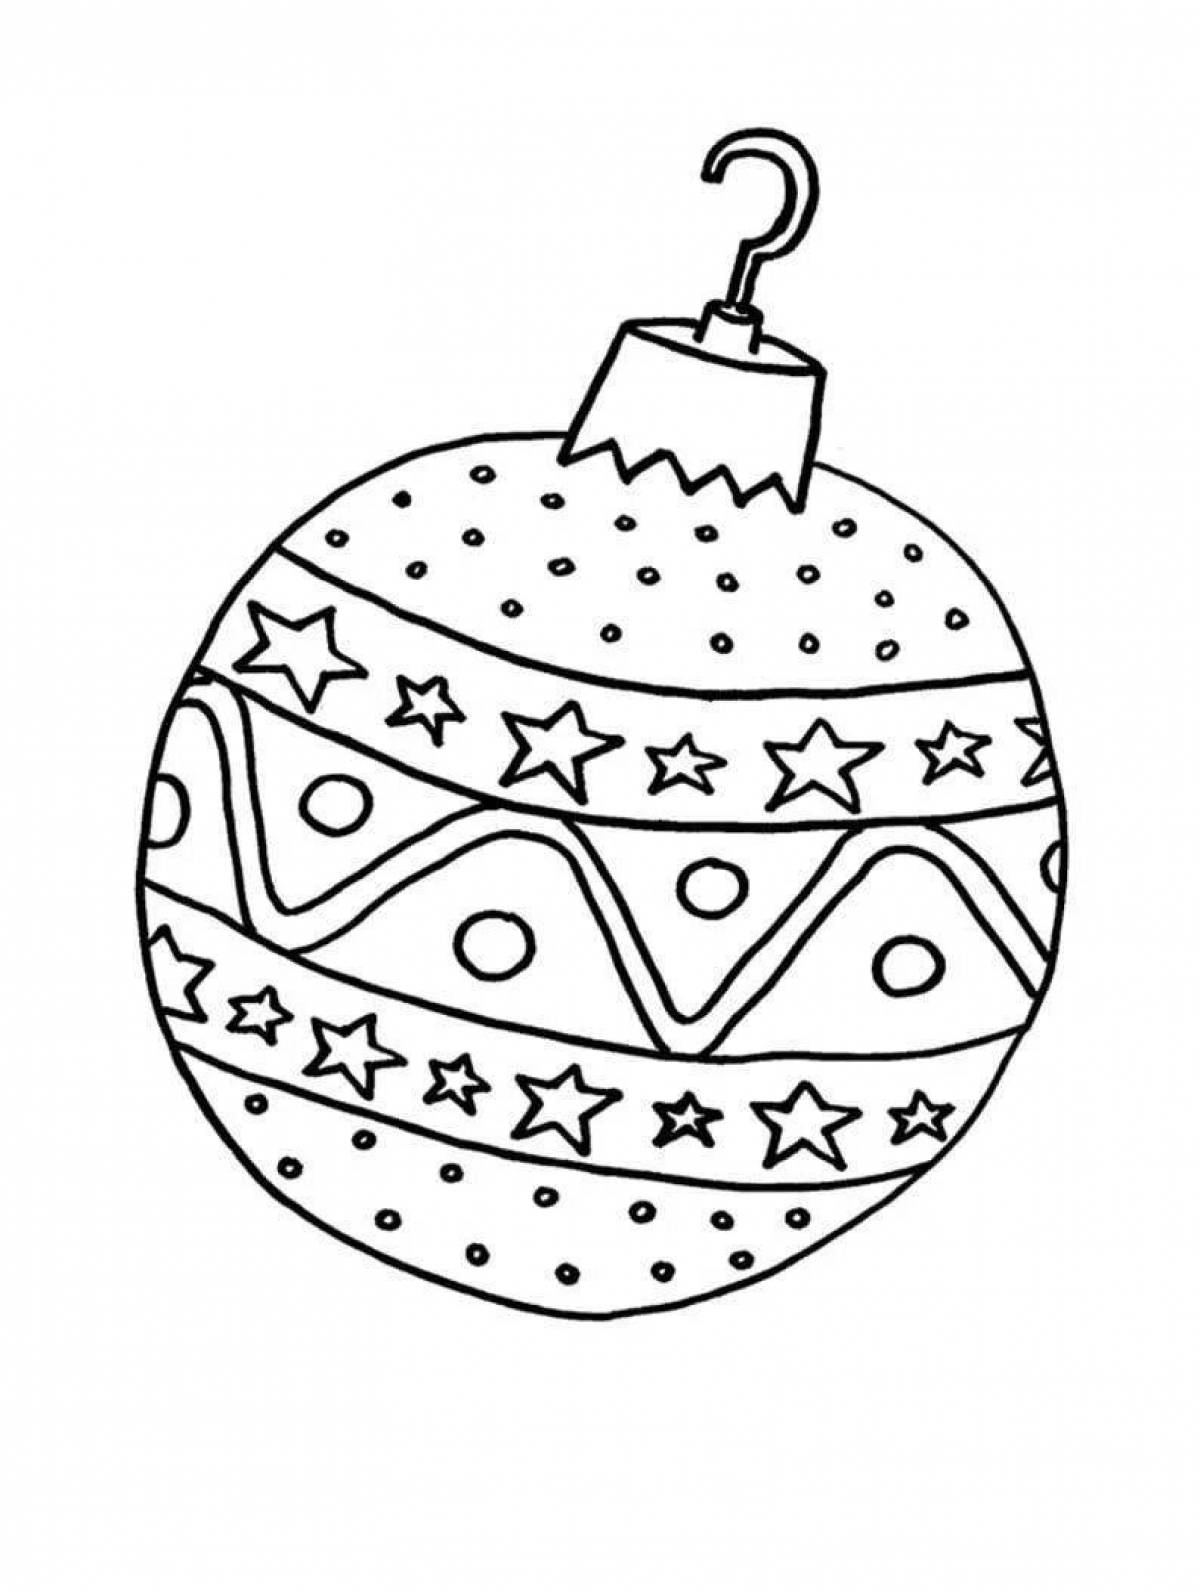 Gorgeous Christmas toys coloring book